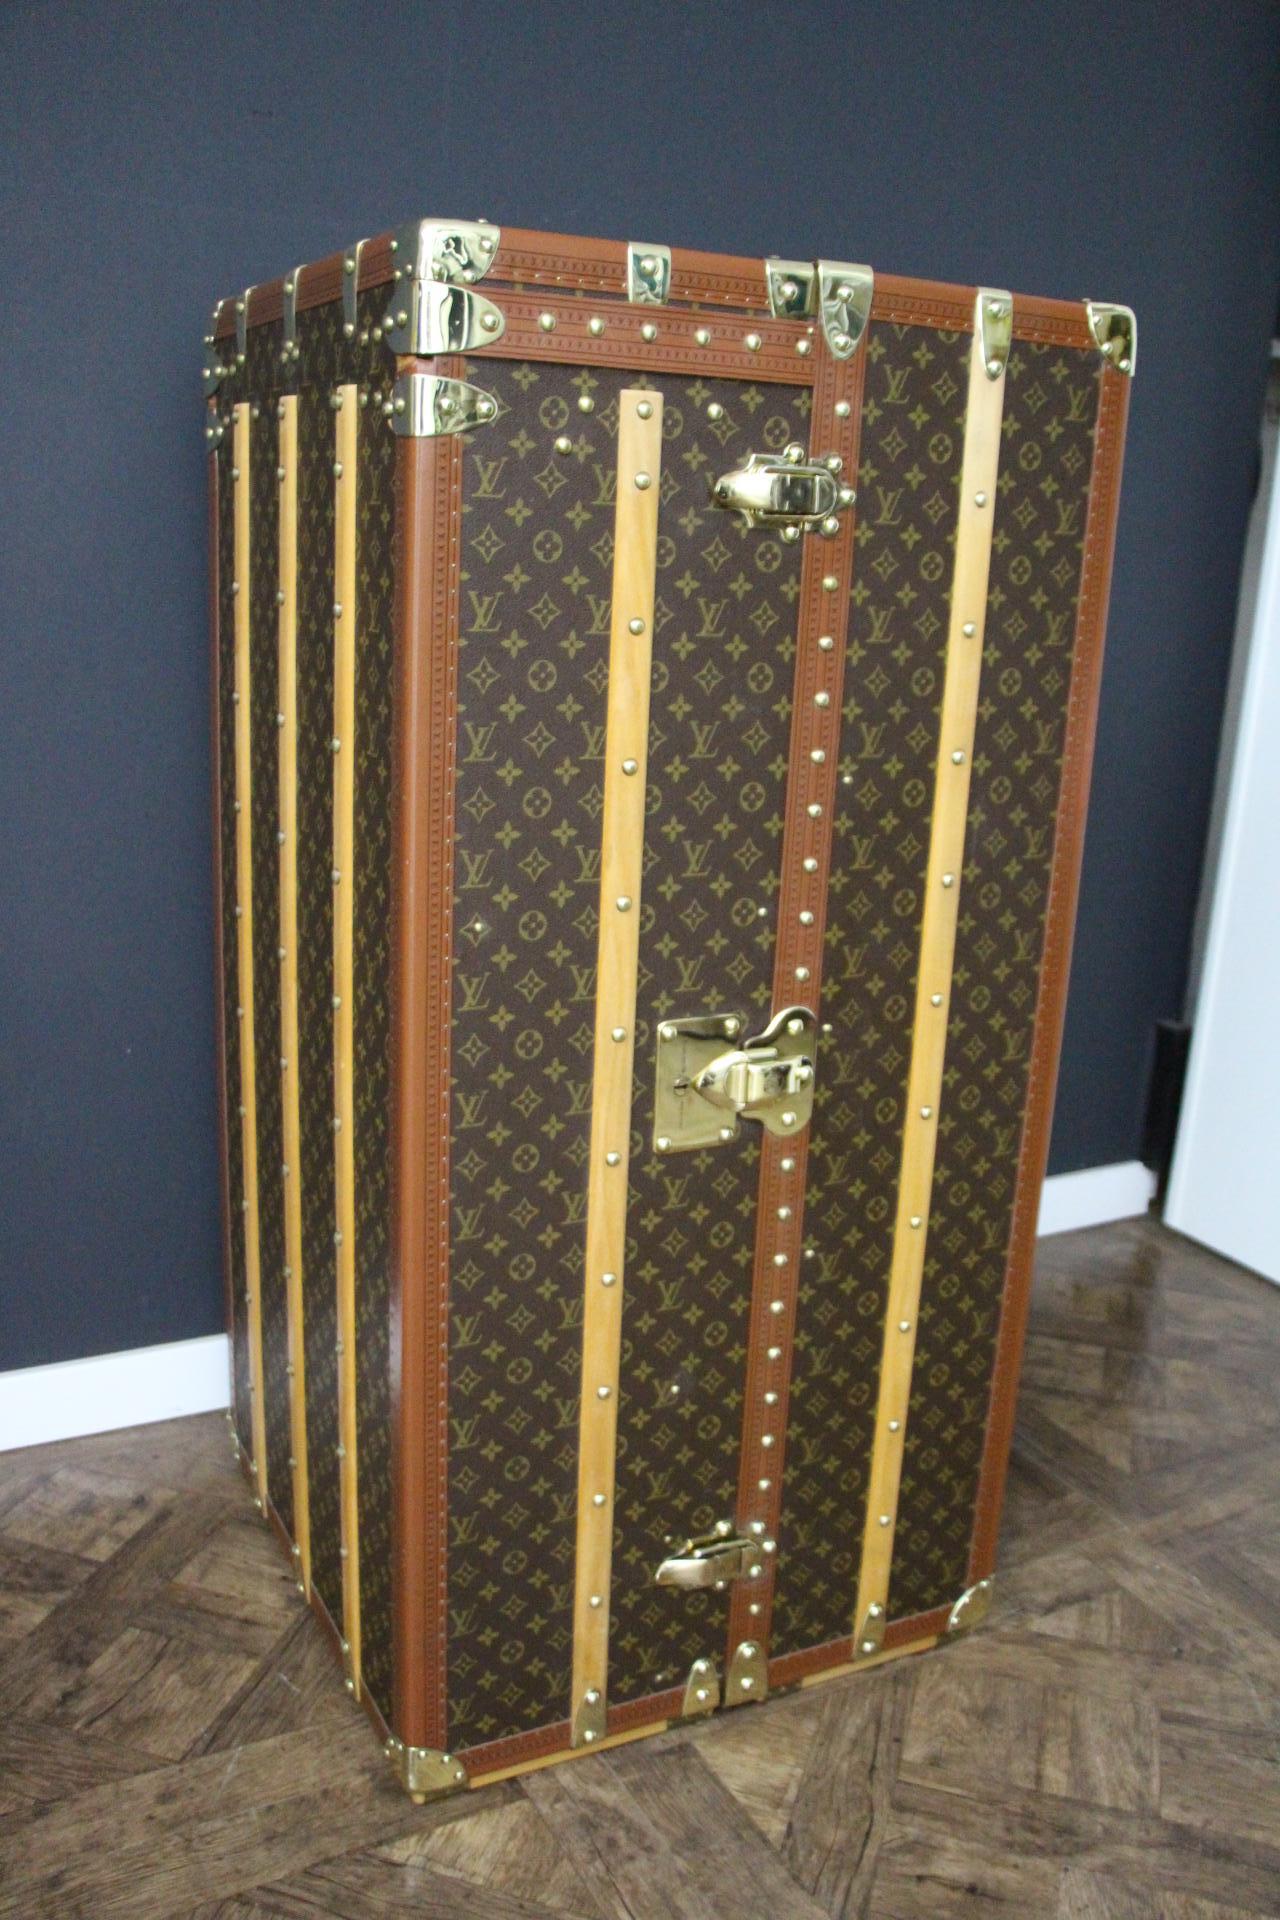 This impressive Louis Vuitton wardrobe features monogramm canvas, lozine trim, LV stamped solid brass locks and studs as well as solid brass corners.
It has got a lift top that closes thanks to two Vuitton stamped brass locks.
Its interior is